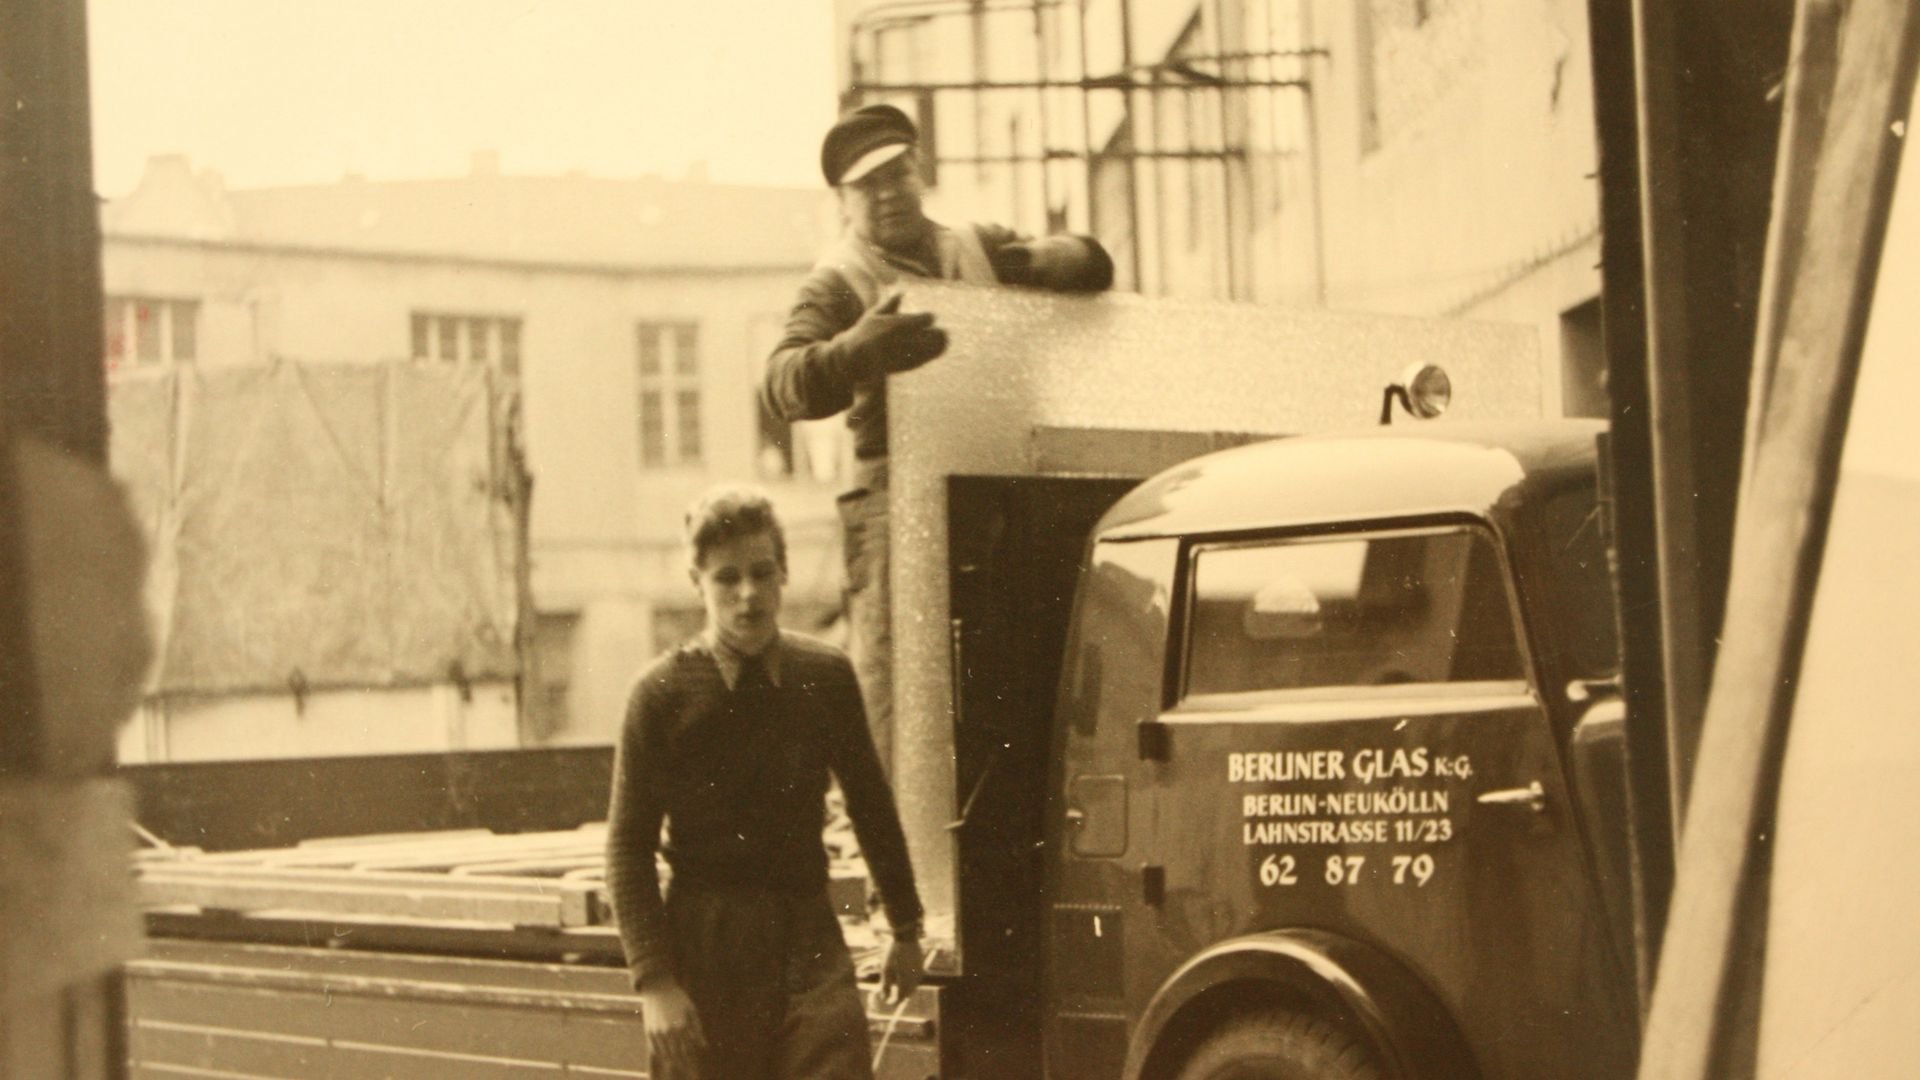 Old-fashioned picture of two men loading glass onto a Berliner Glas truck.